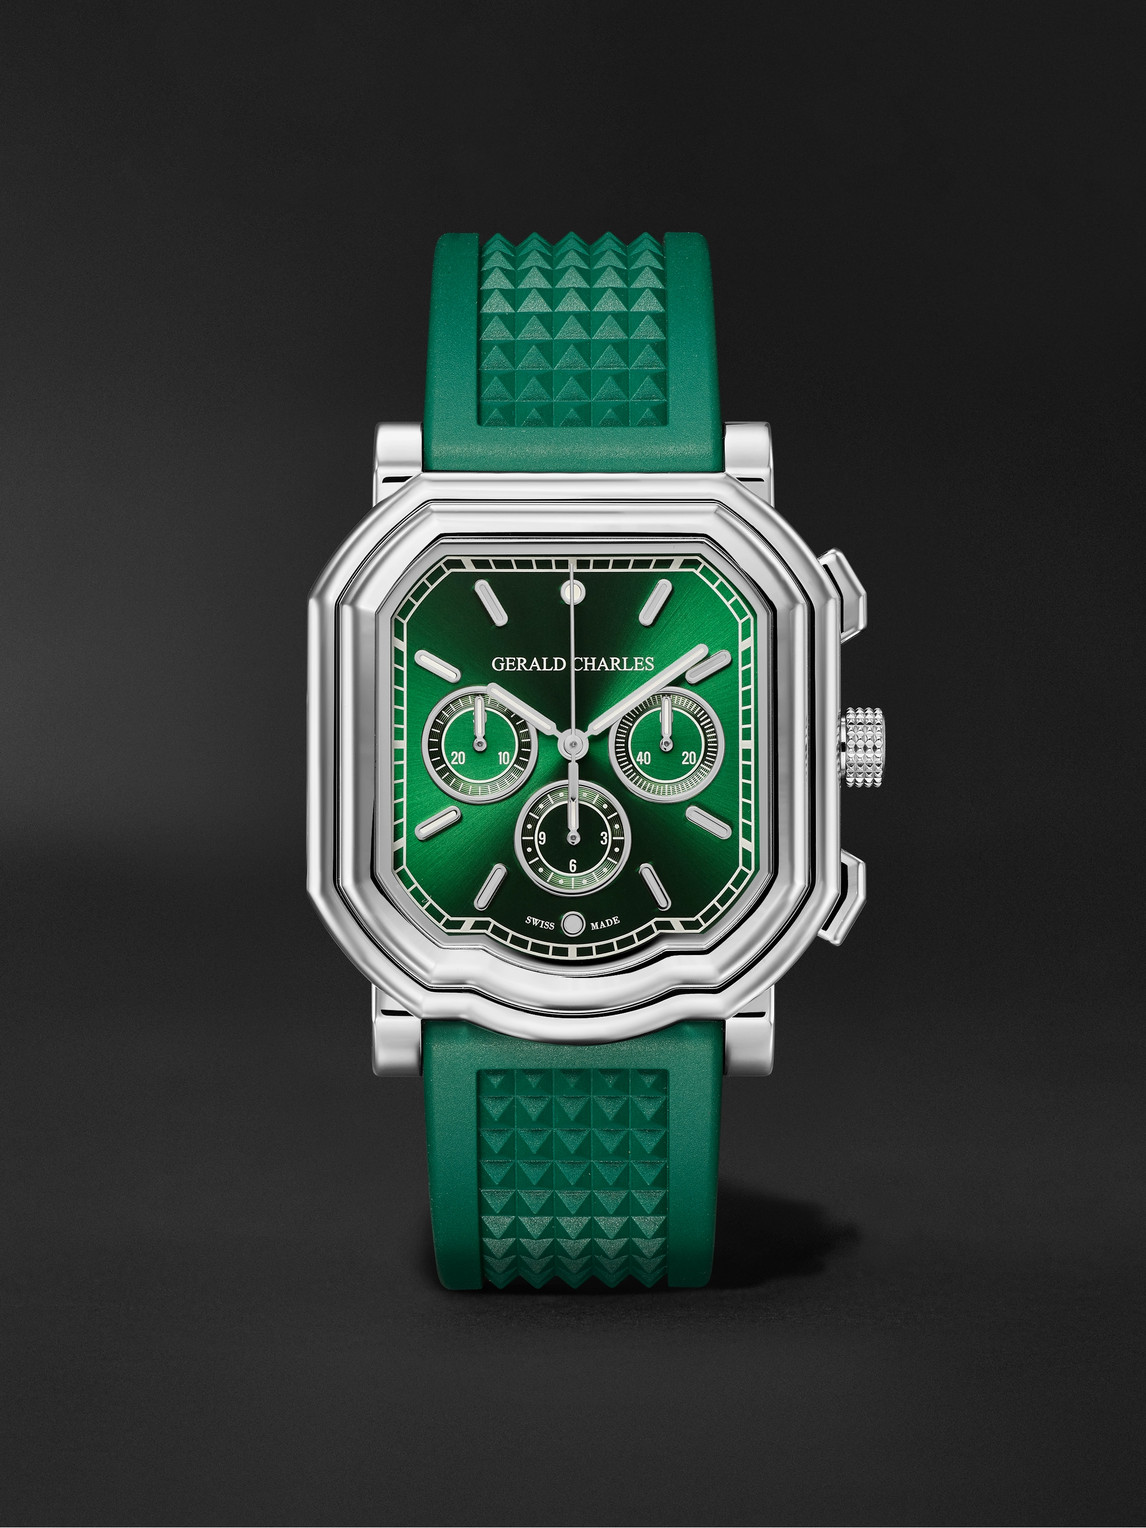 Gerald Charles Maestro 3.0 Automatic Chronograph 39mm Stainless Steel And Rubber Watch, Ref.no. Gc3.0-a-02 In Green